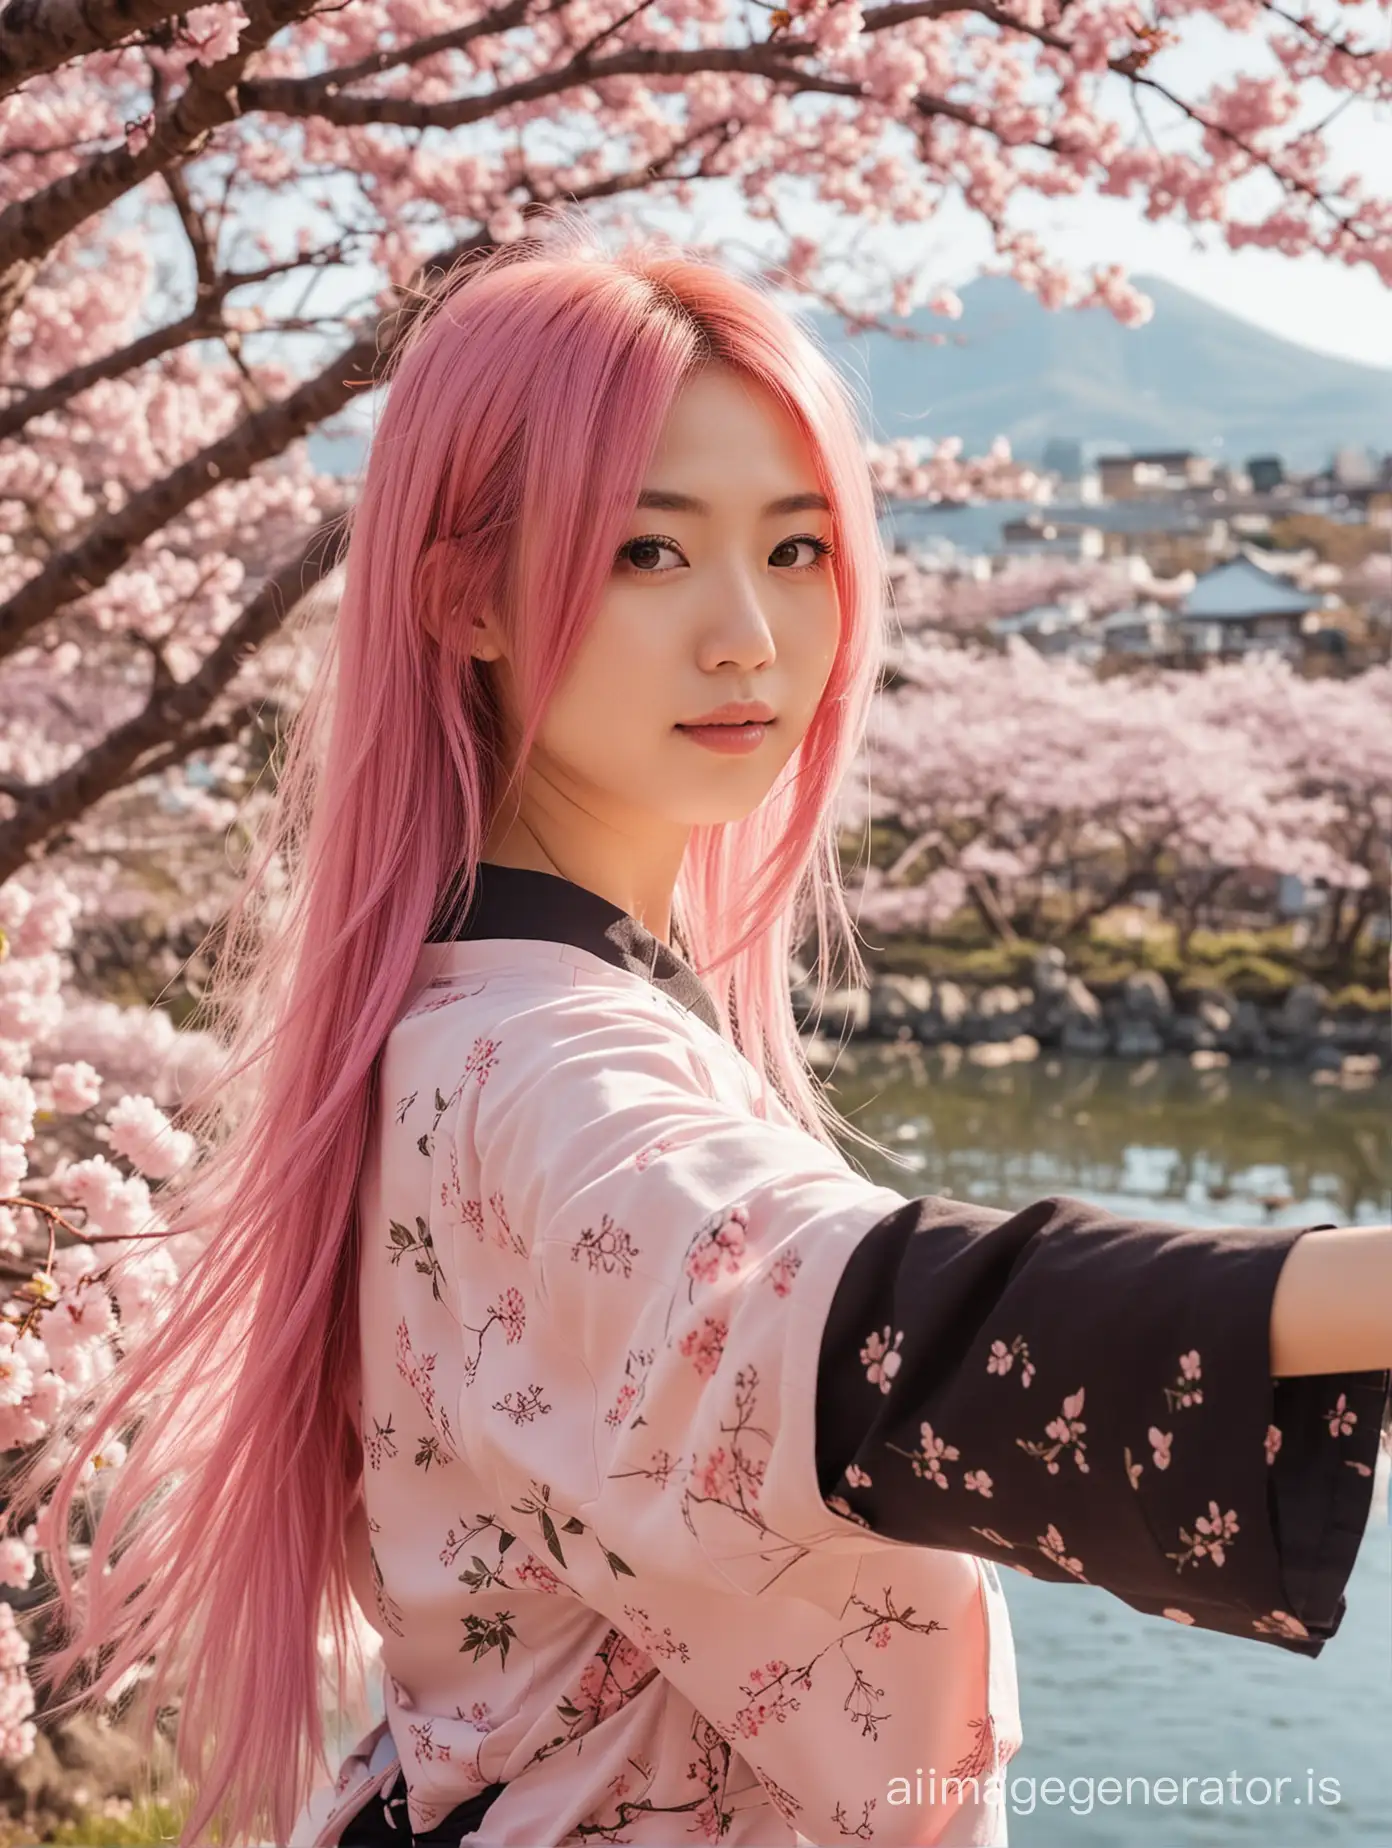 A clear and detailed photo style of a cute, smart, dignified, elegant 26 years old Japanese woman with long pink hair, directing towards us. The background is a spring scenery of Japan with cherry trees in bloom.